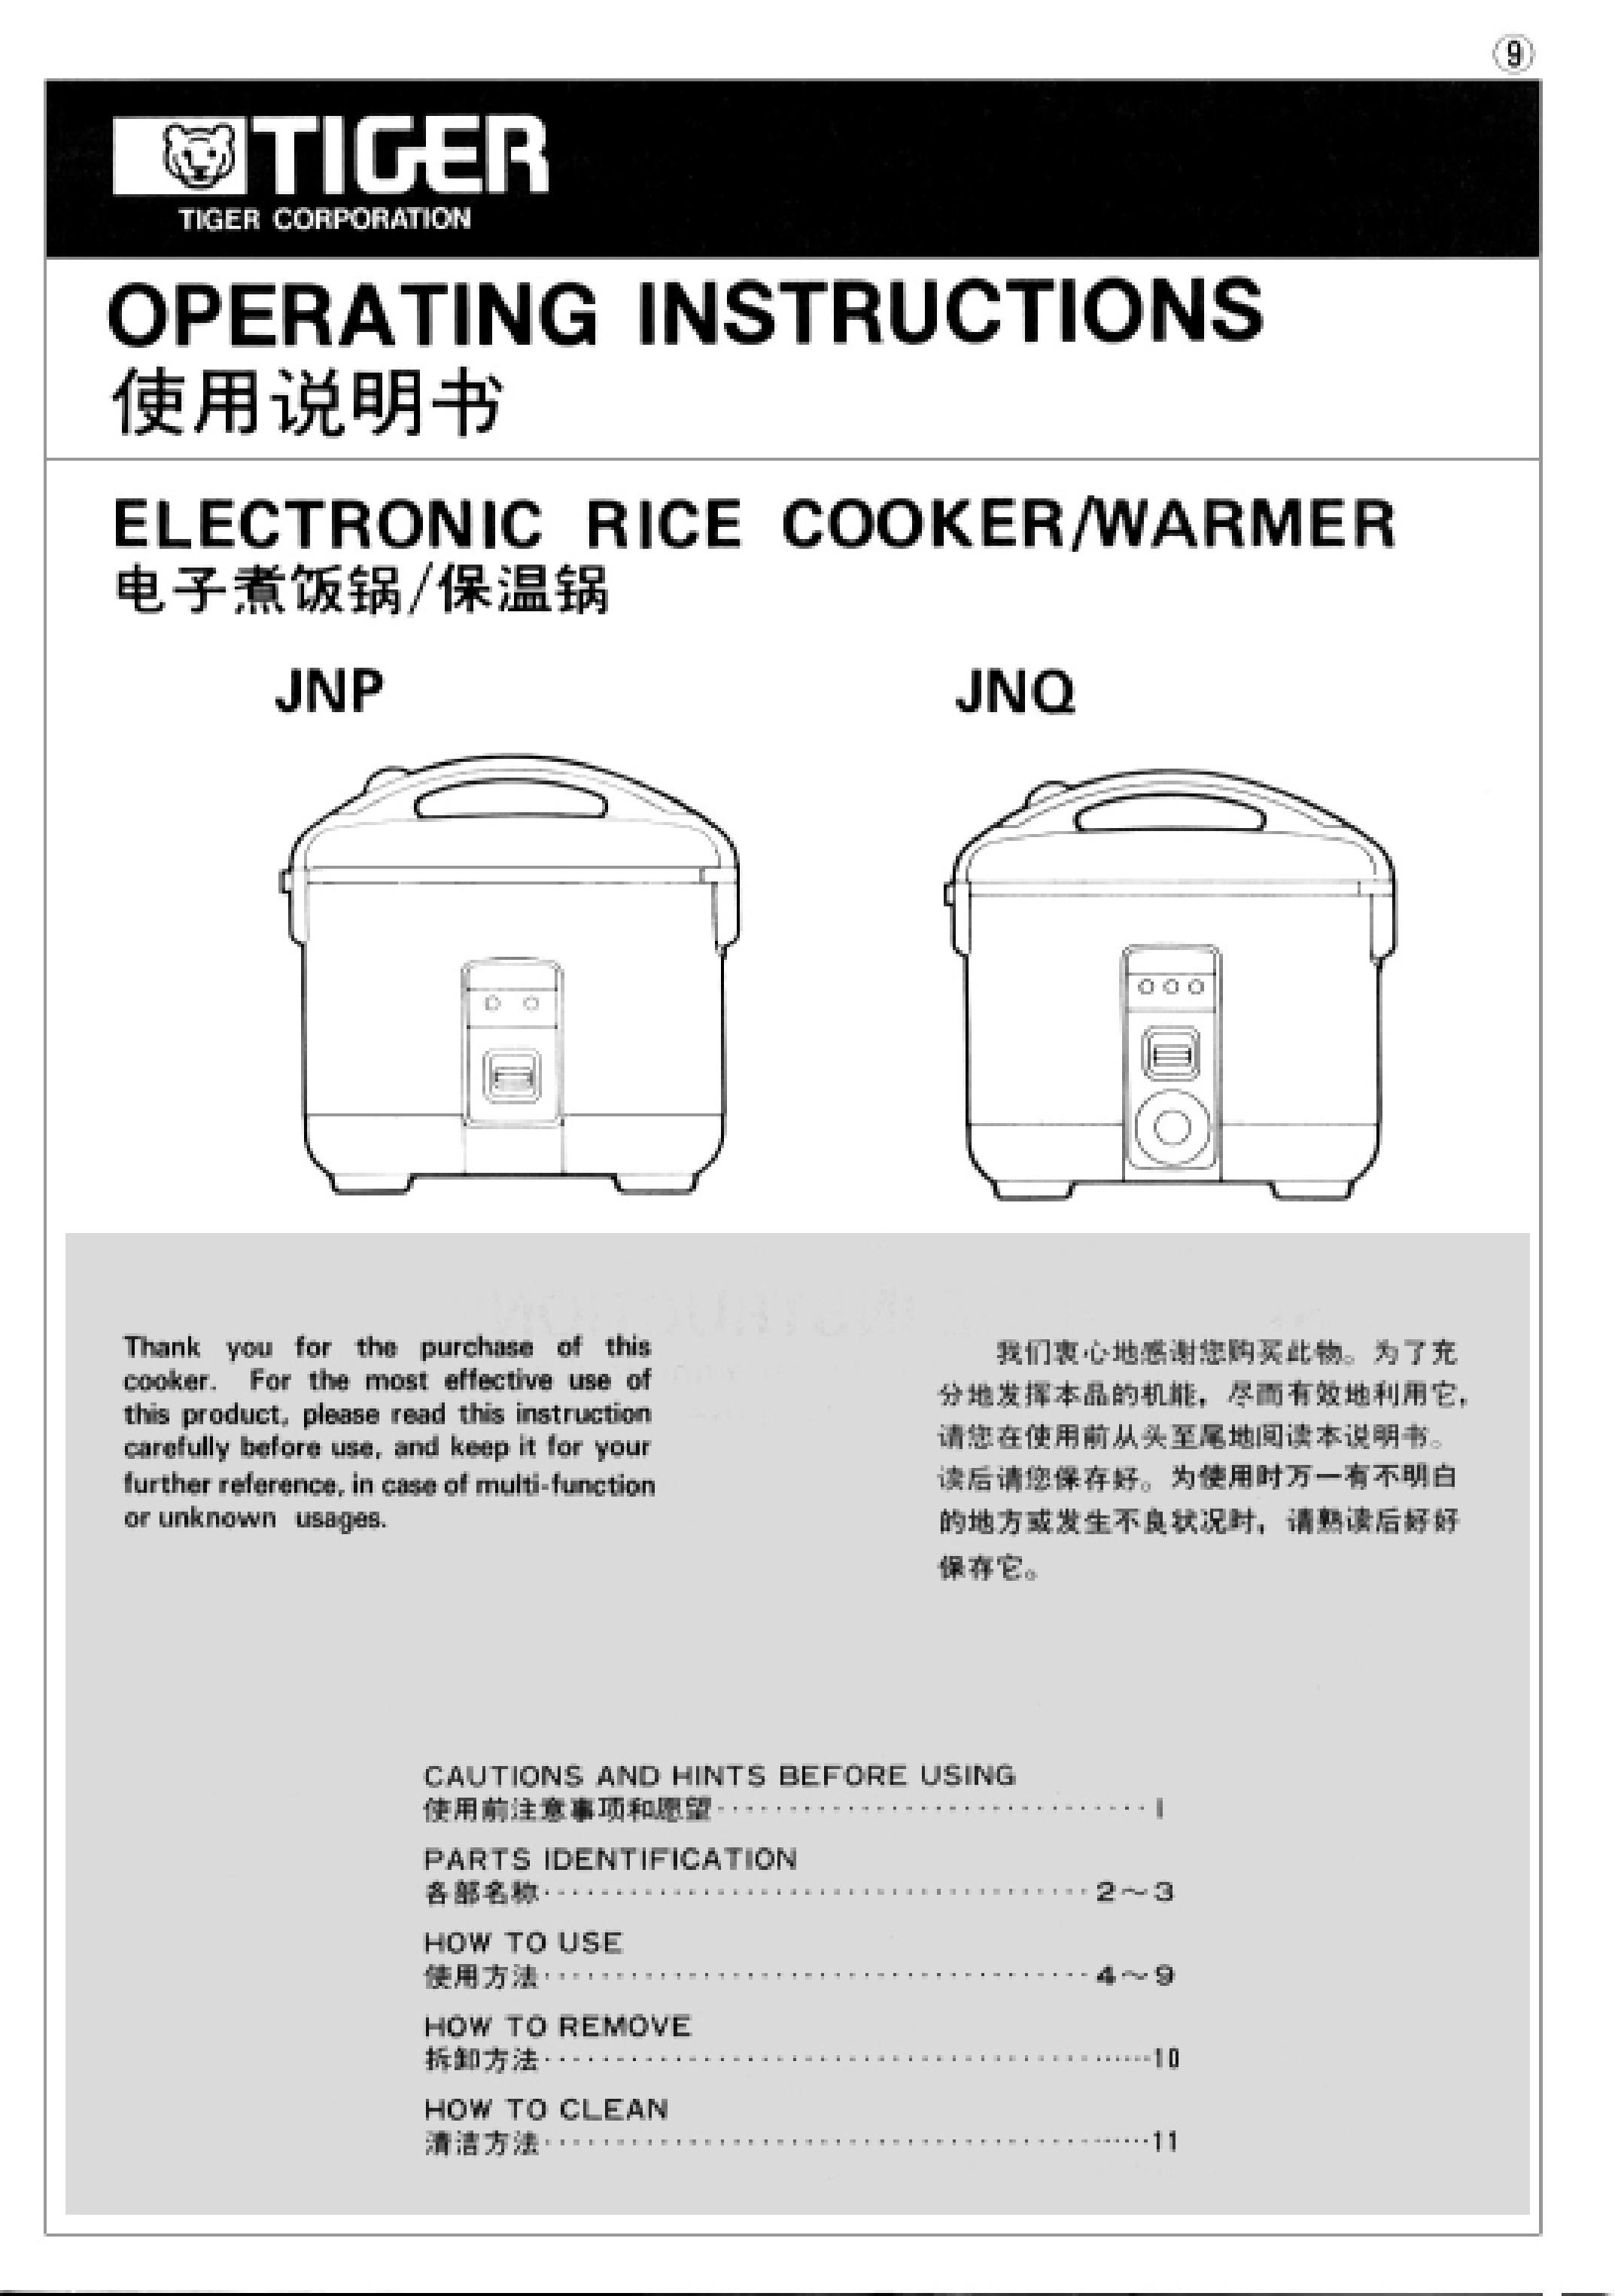 Tiger Products Co., Ltd JNP Rice Cooker User Manual